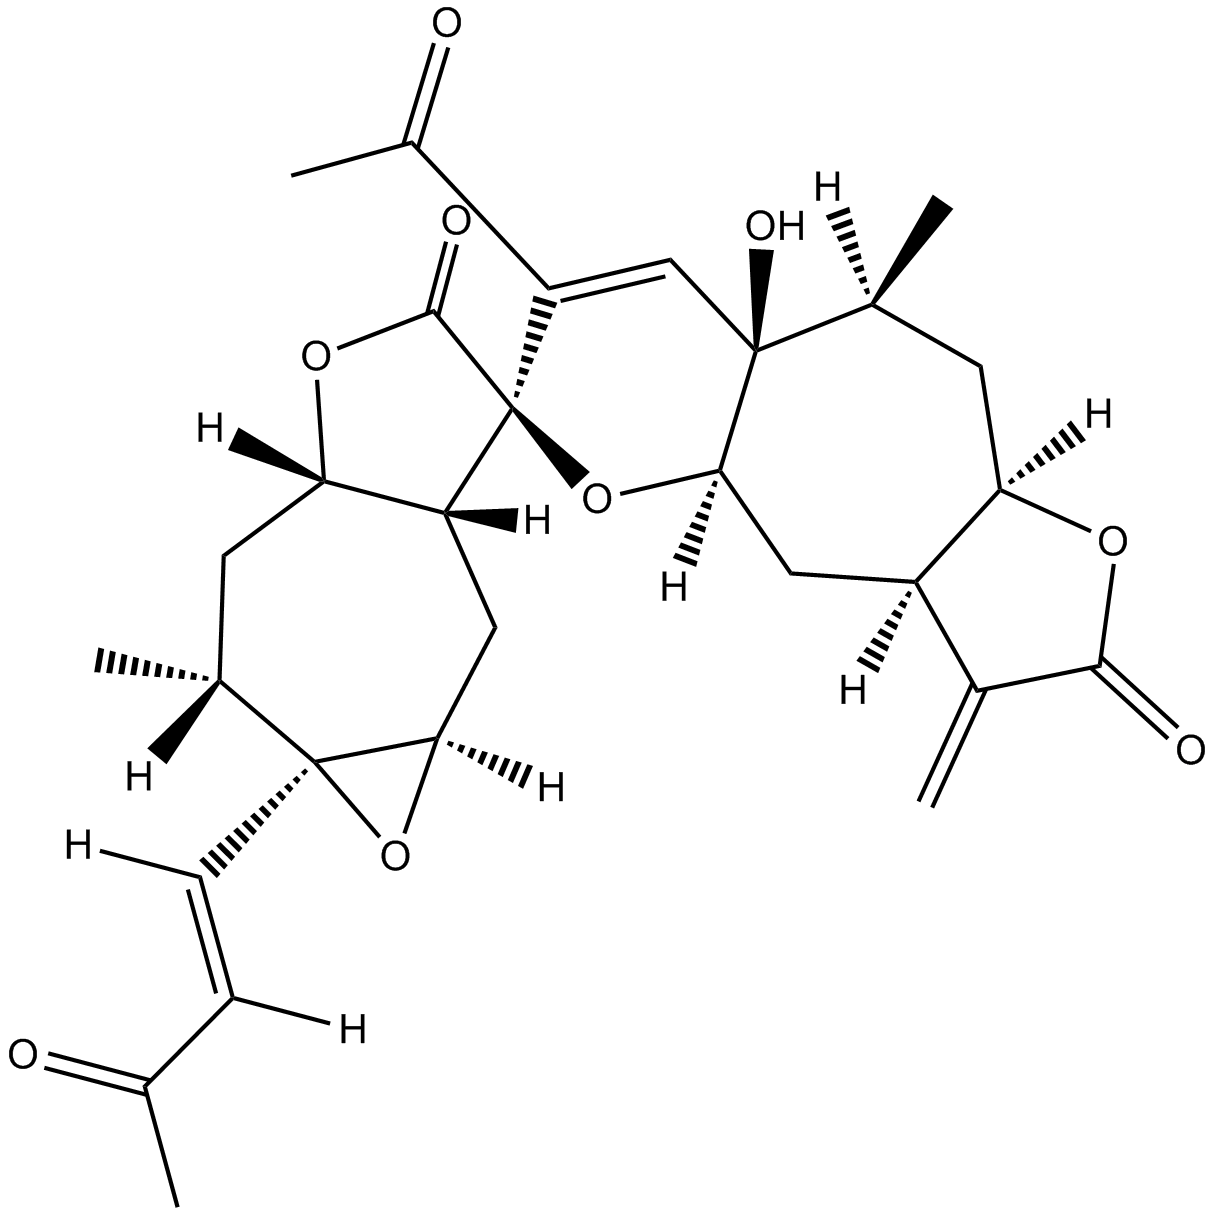 Pungiolide A  Chemical Structure